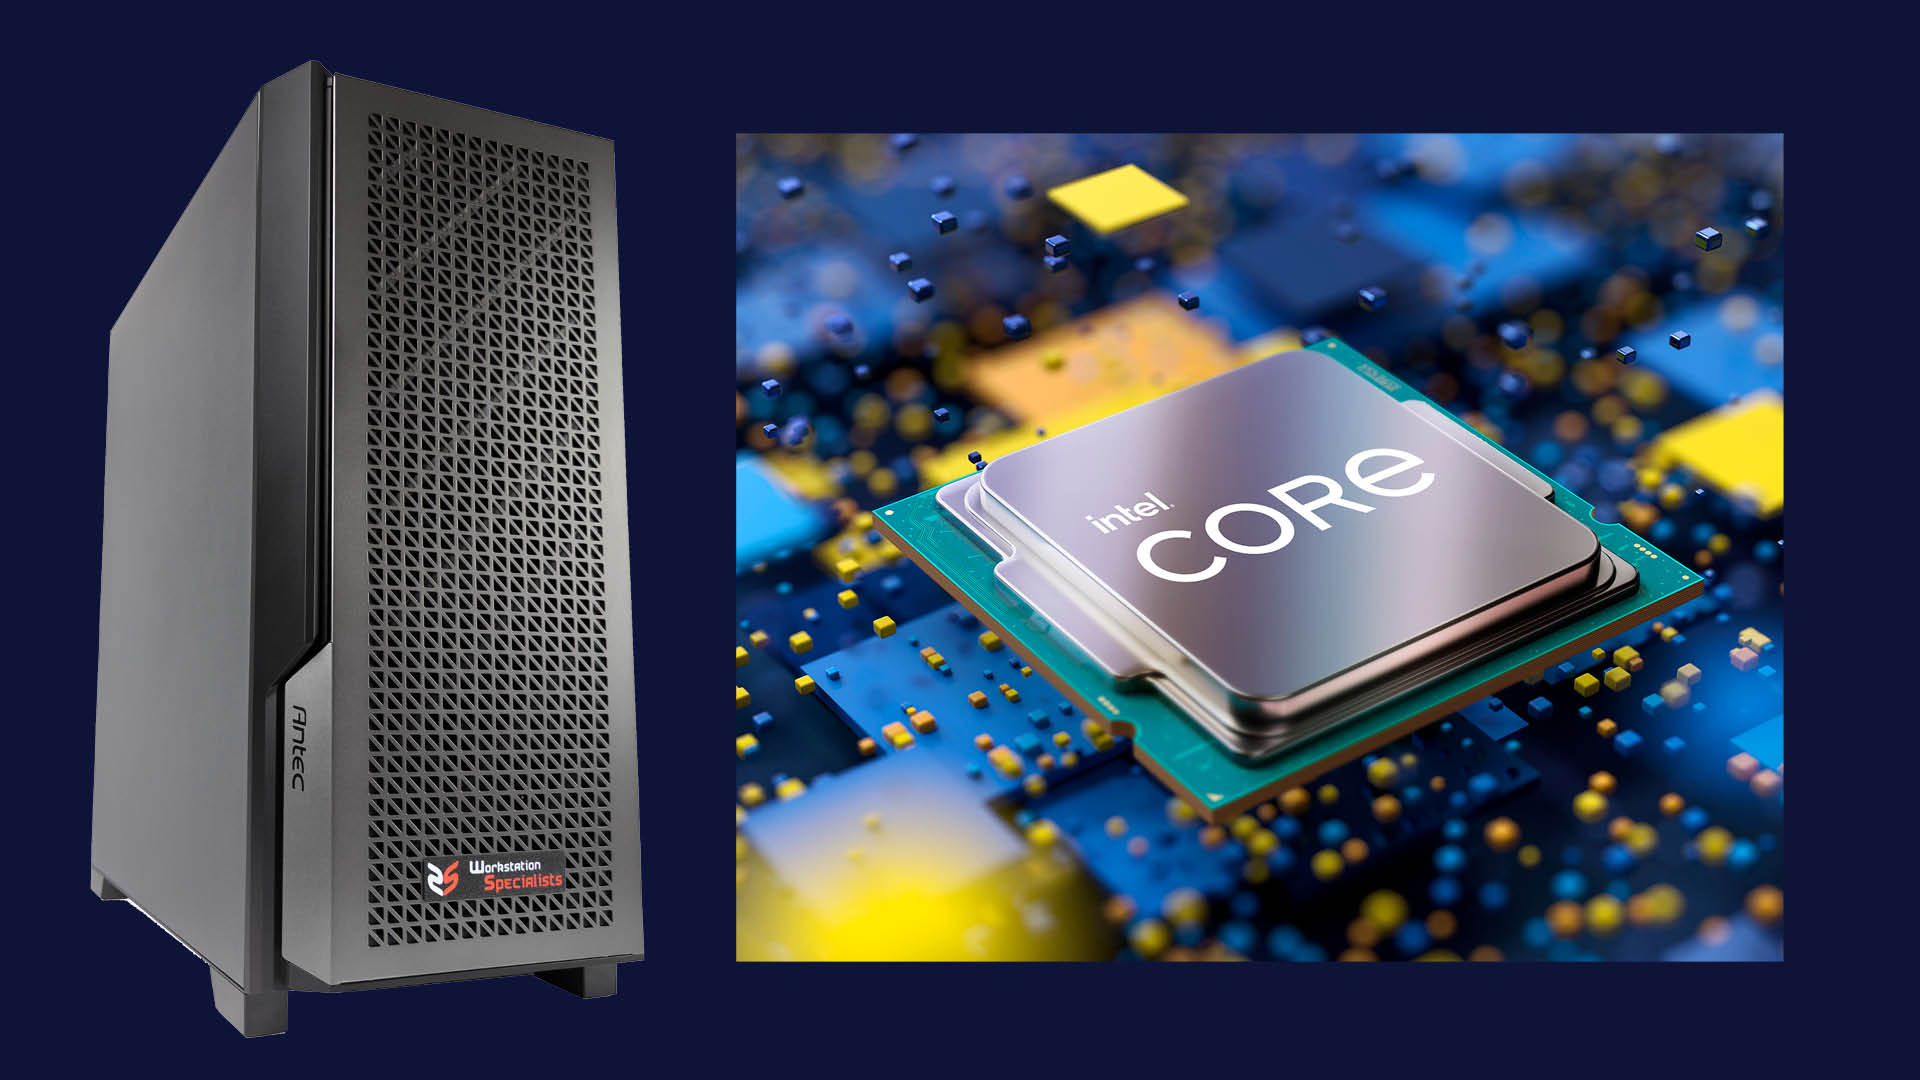 Workstation Specialists WS IC-Z7900 - 14th Gen Intel Core for CAD